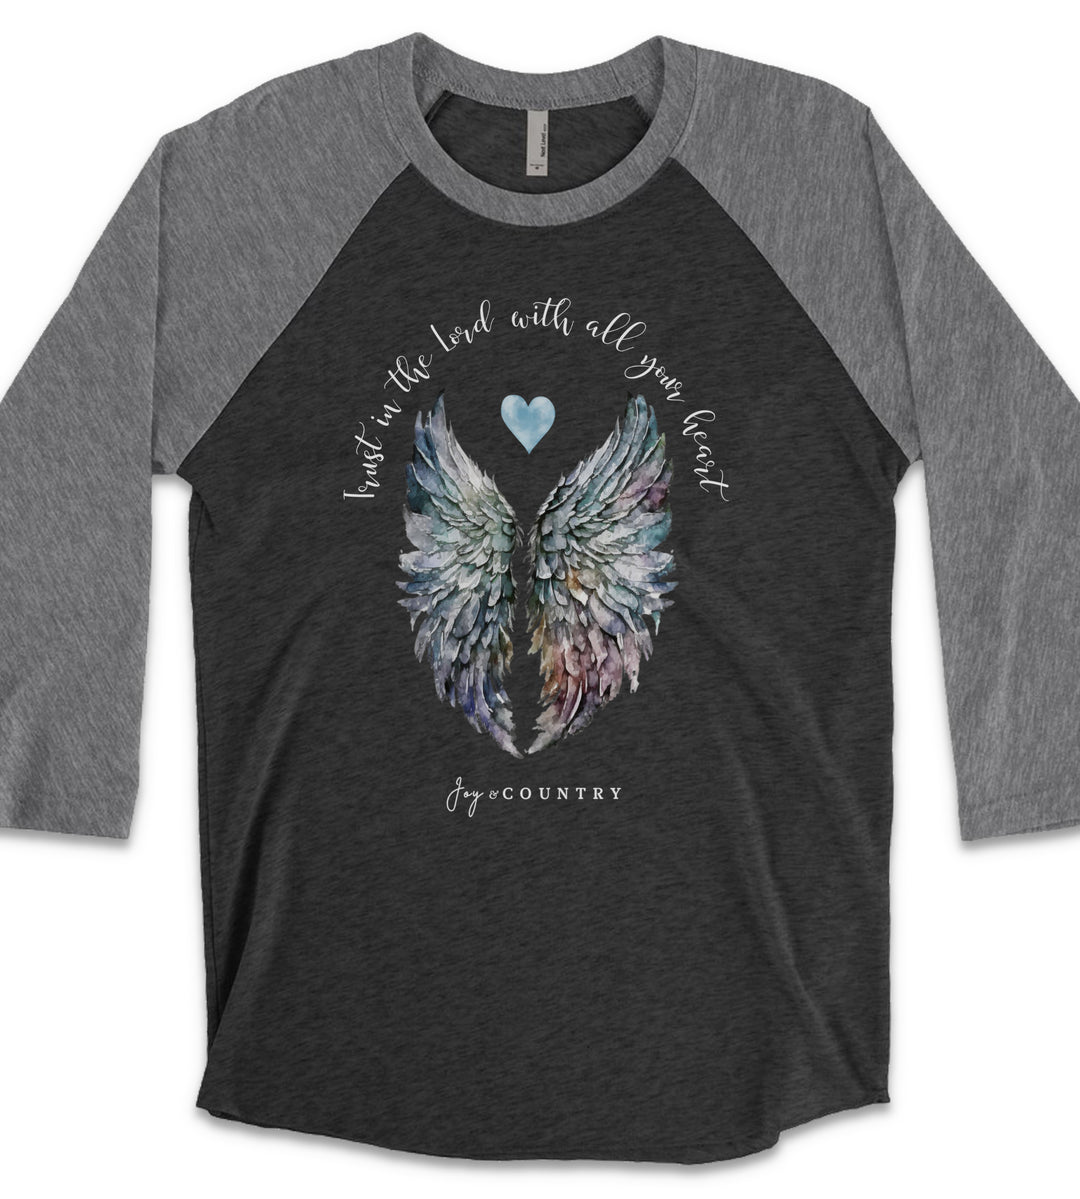 Trust In The Lord With All Your Heart - Unisex Tri-Blend 3/4 Sleeve Raglan Tee